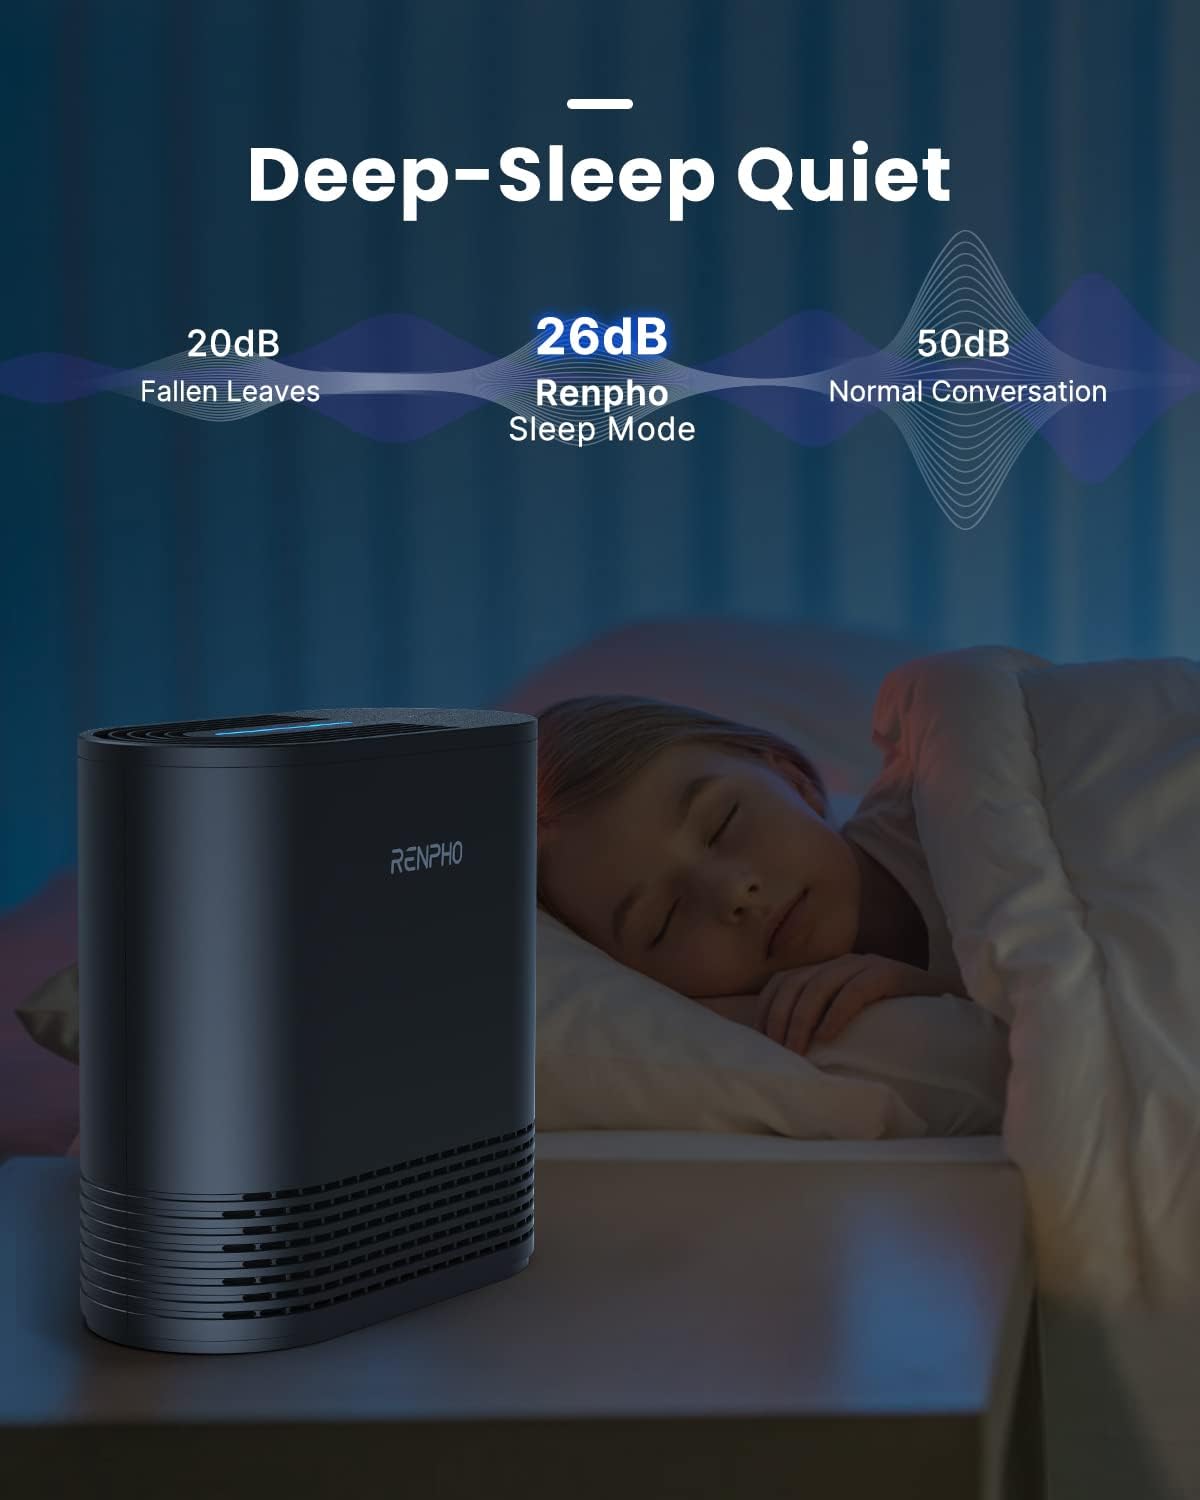 An Compact Air Purifier 068 Ozone Free with a Renpho brand mark showcases its efficiency through a graph comparing noise levels: 20db akin to fallen leaves, 26db in sleep mode.